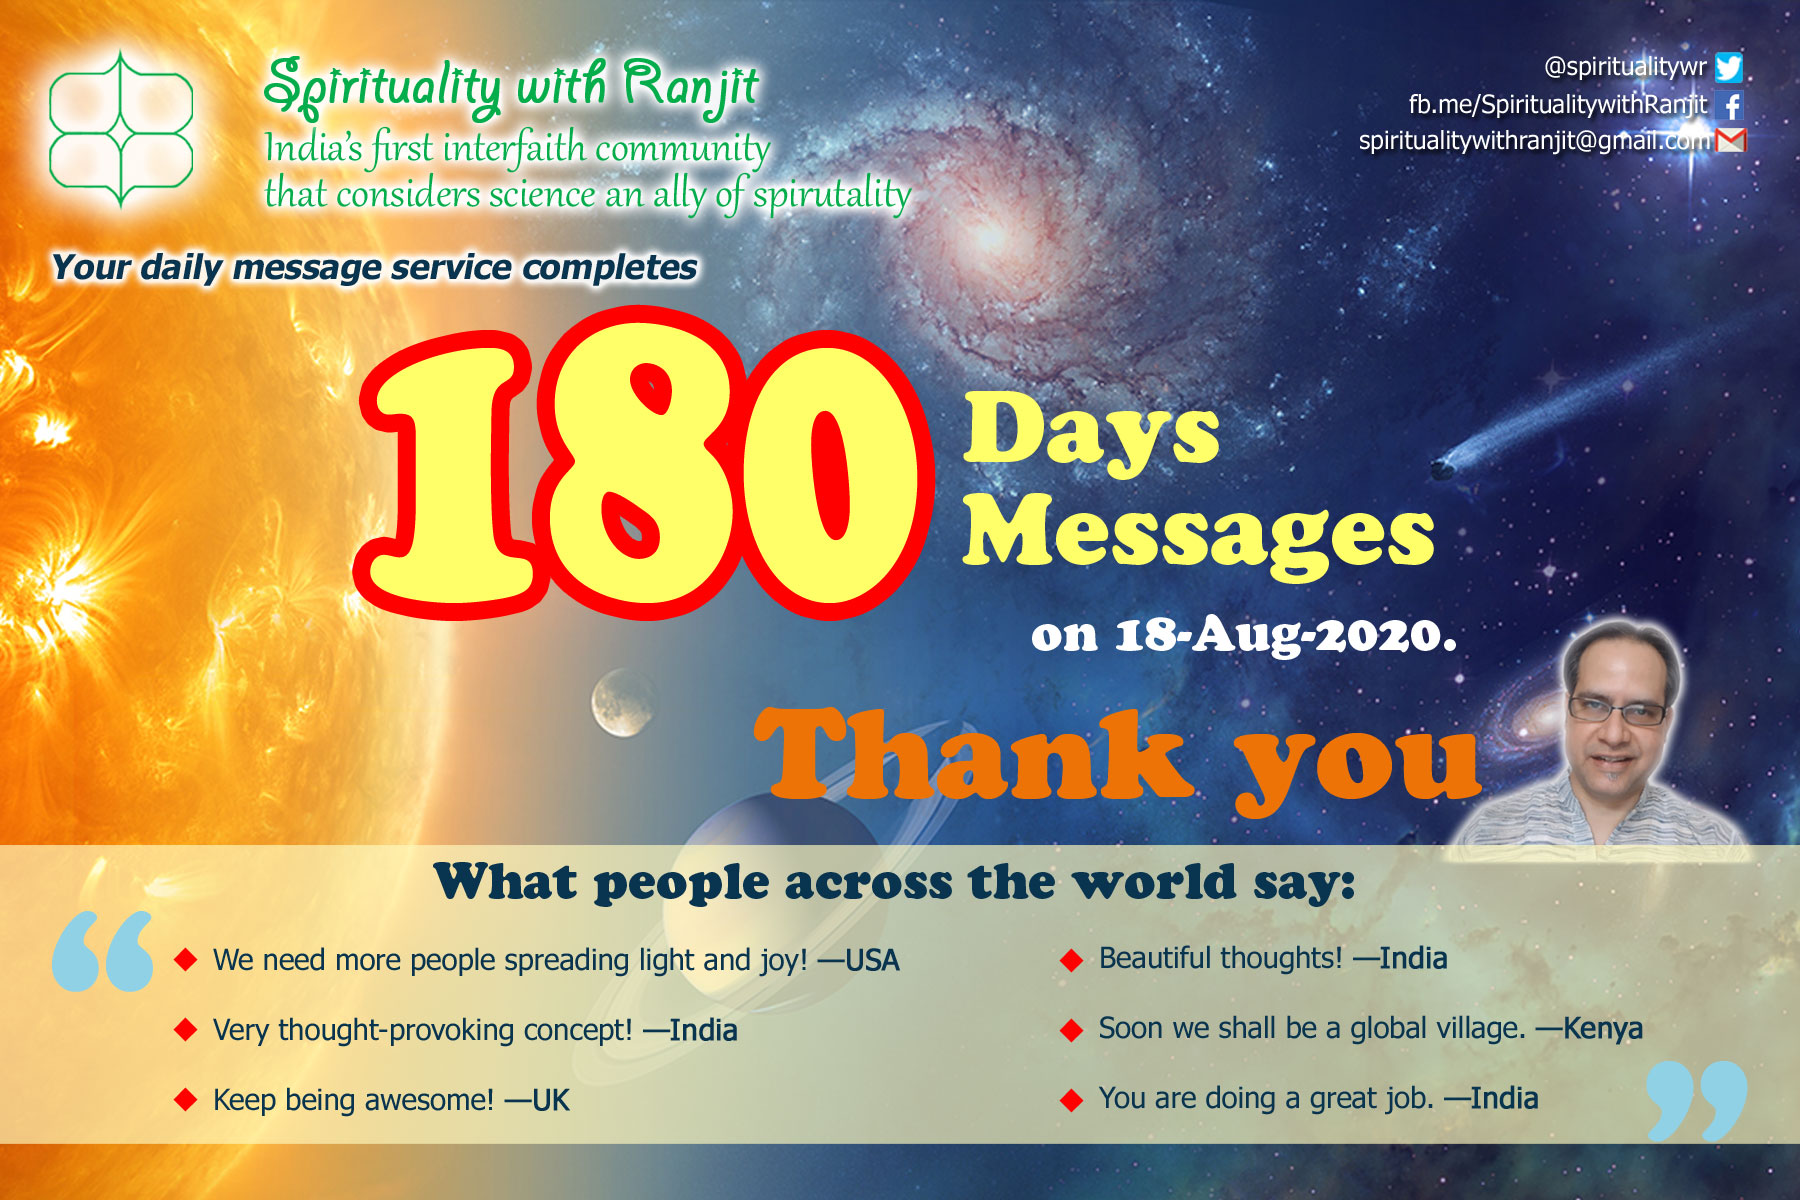 Spirituality_with_Ranjit_Completes_180_Days